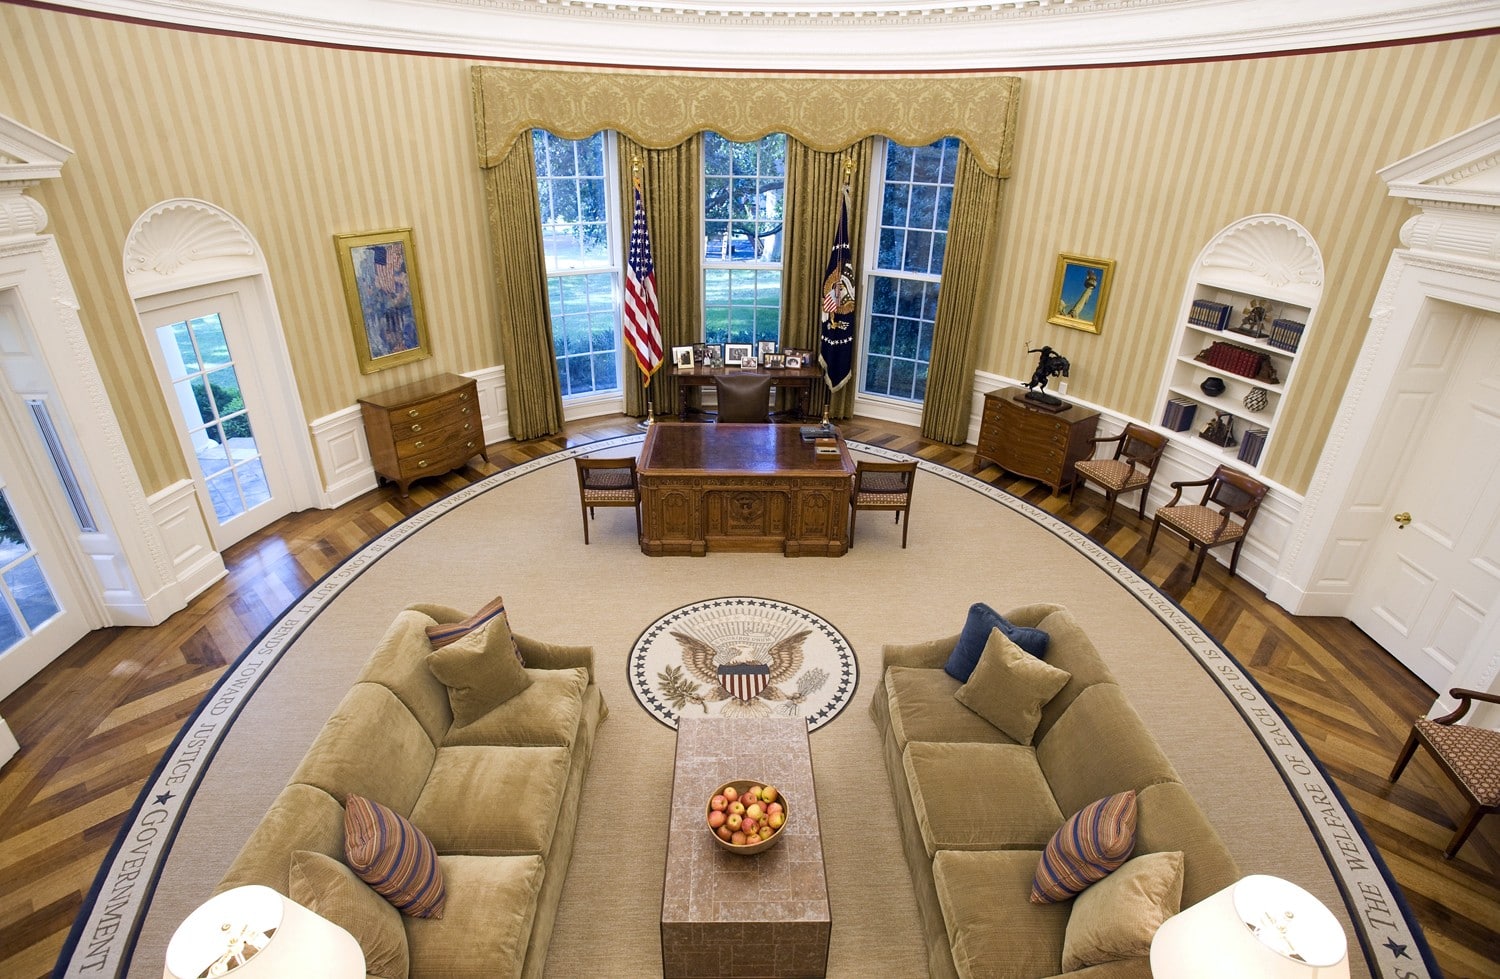 Can You Get an ‘A’ In This Middle School U.S. History Test? White House Oval Office